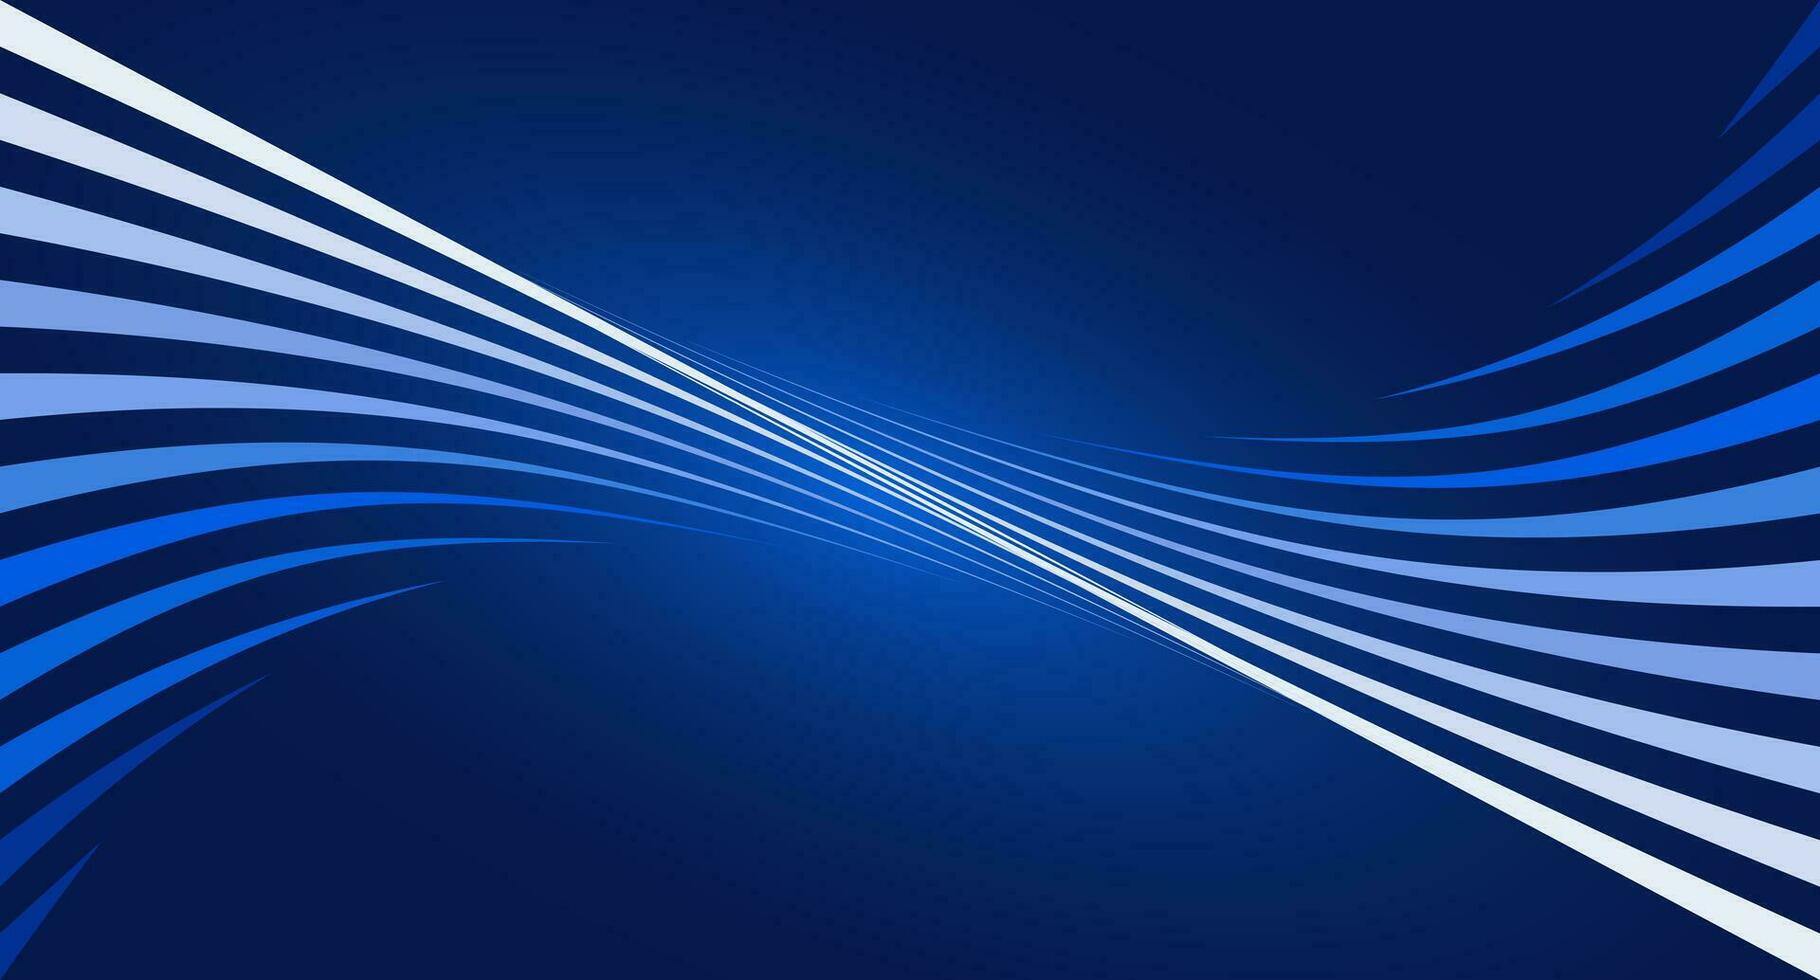 BLUE LINE ABSTRACT BACKGROUND VECTOR ART